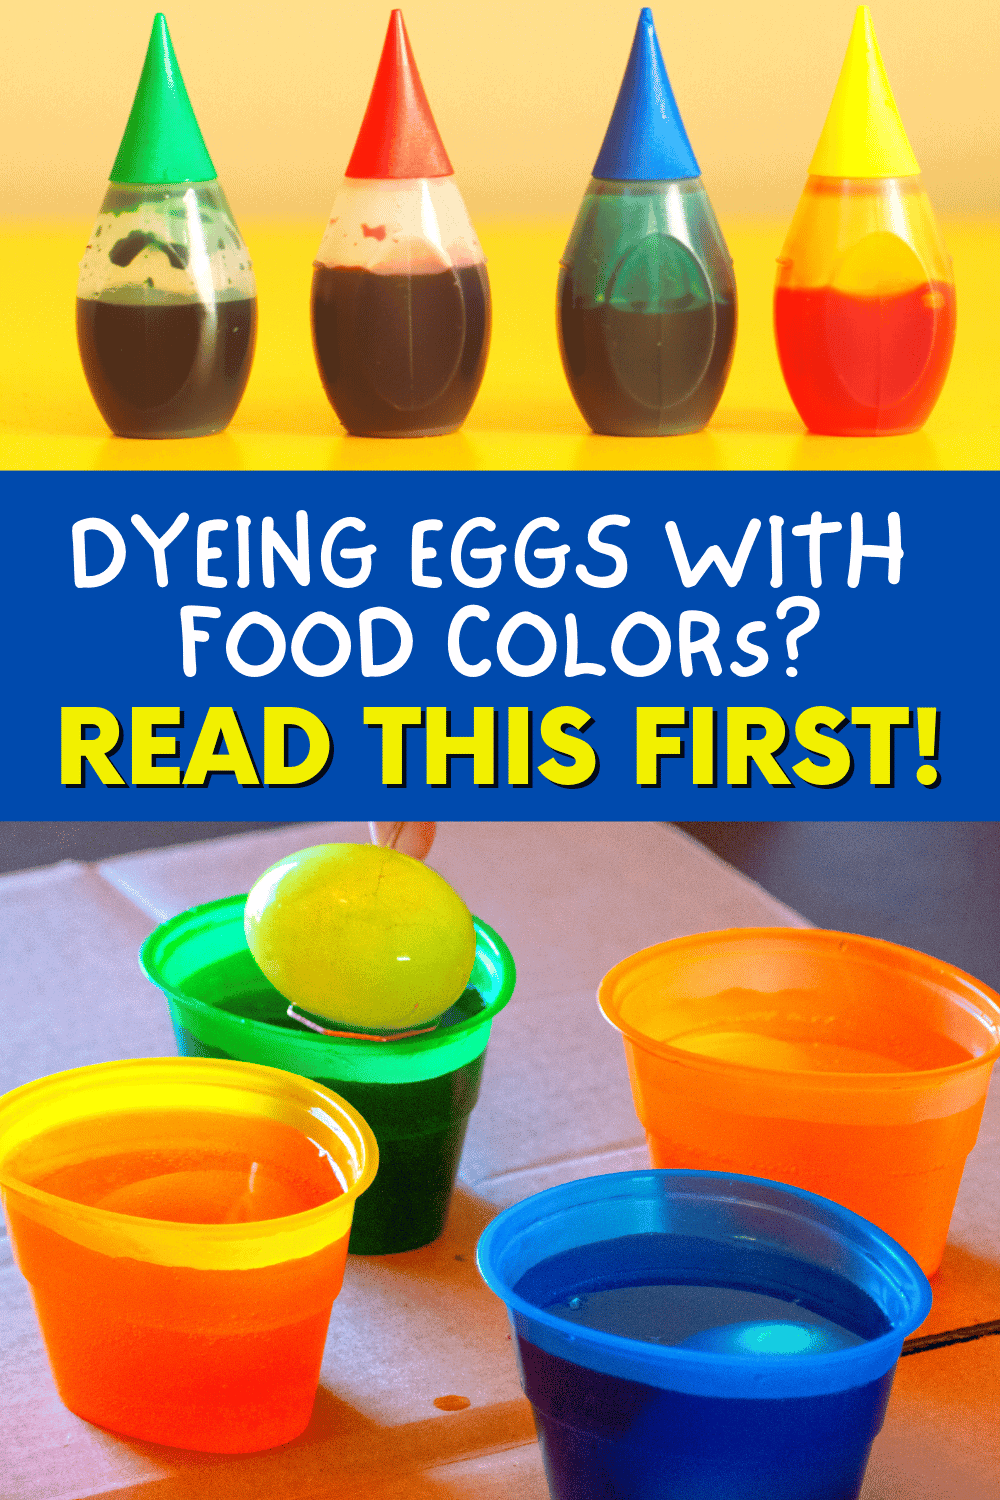 How to dye hard boiled eggs with food coloring (vintage Easter egg dye) text with food coloring and dyed eggs on a table